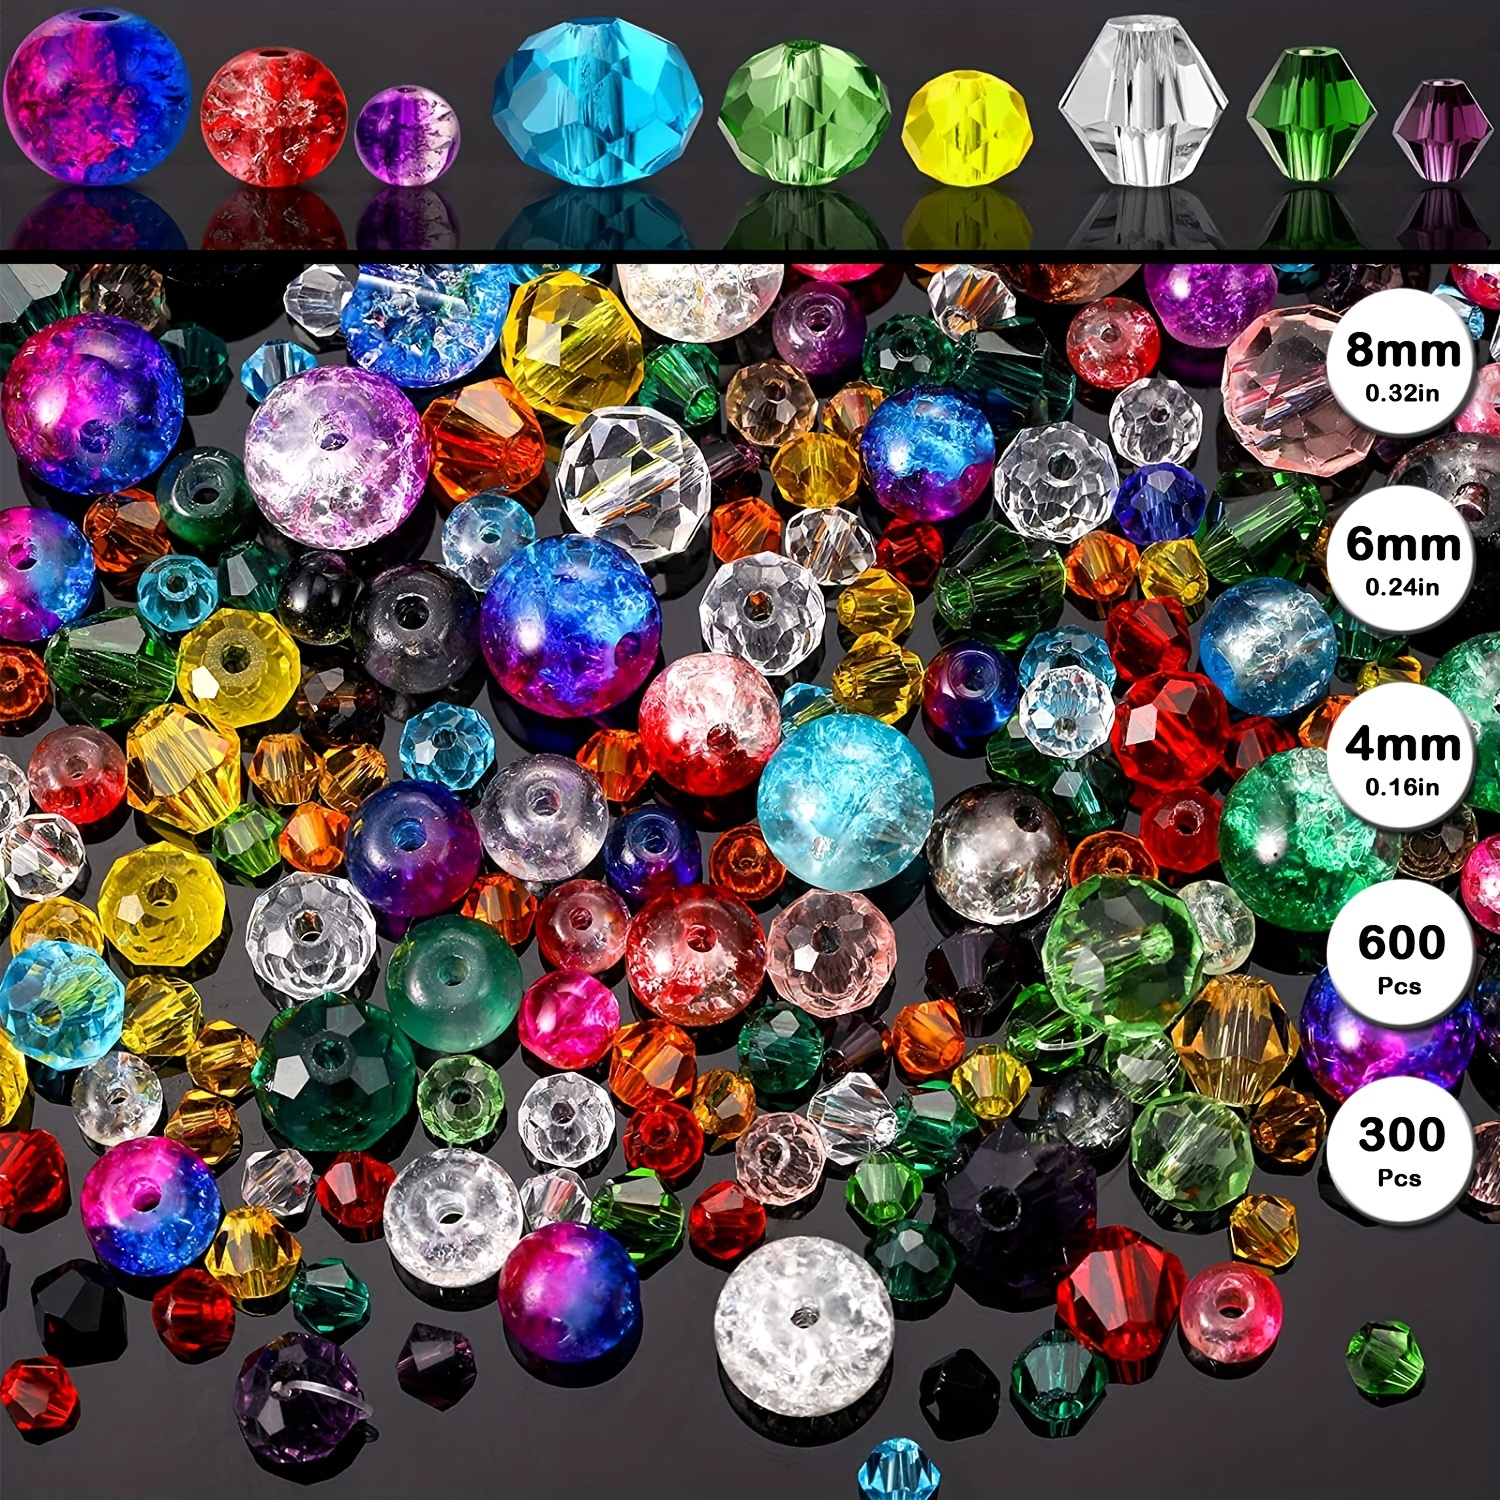  600 Pcs Glass Beads for Jewelry Making, Assorted